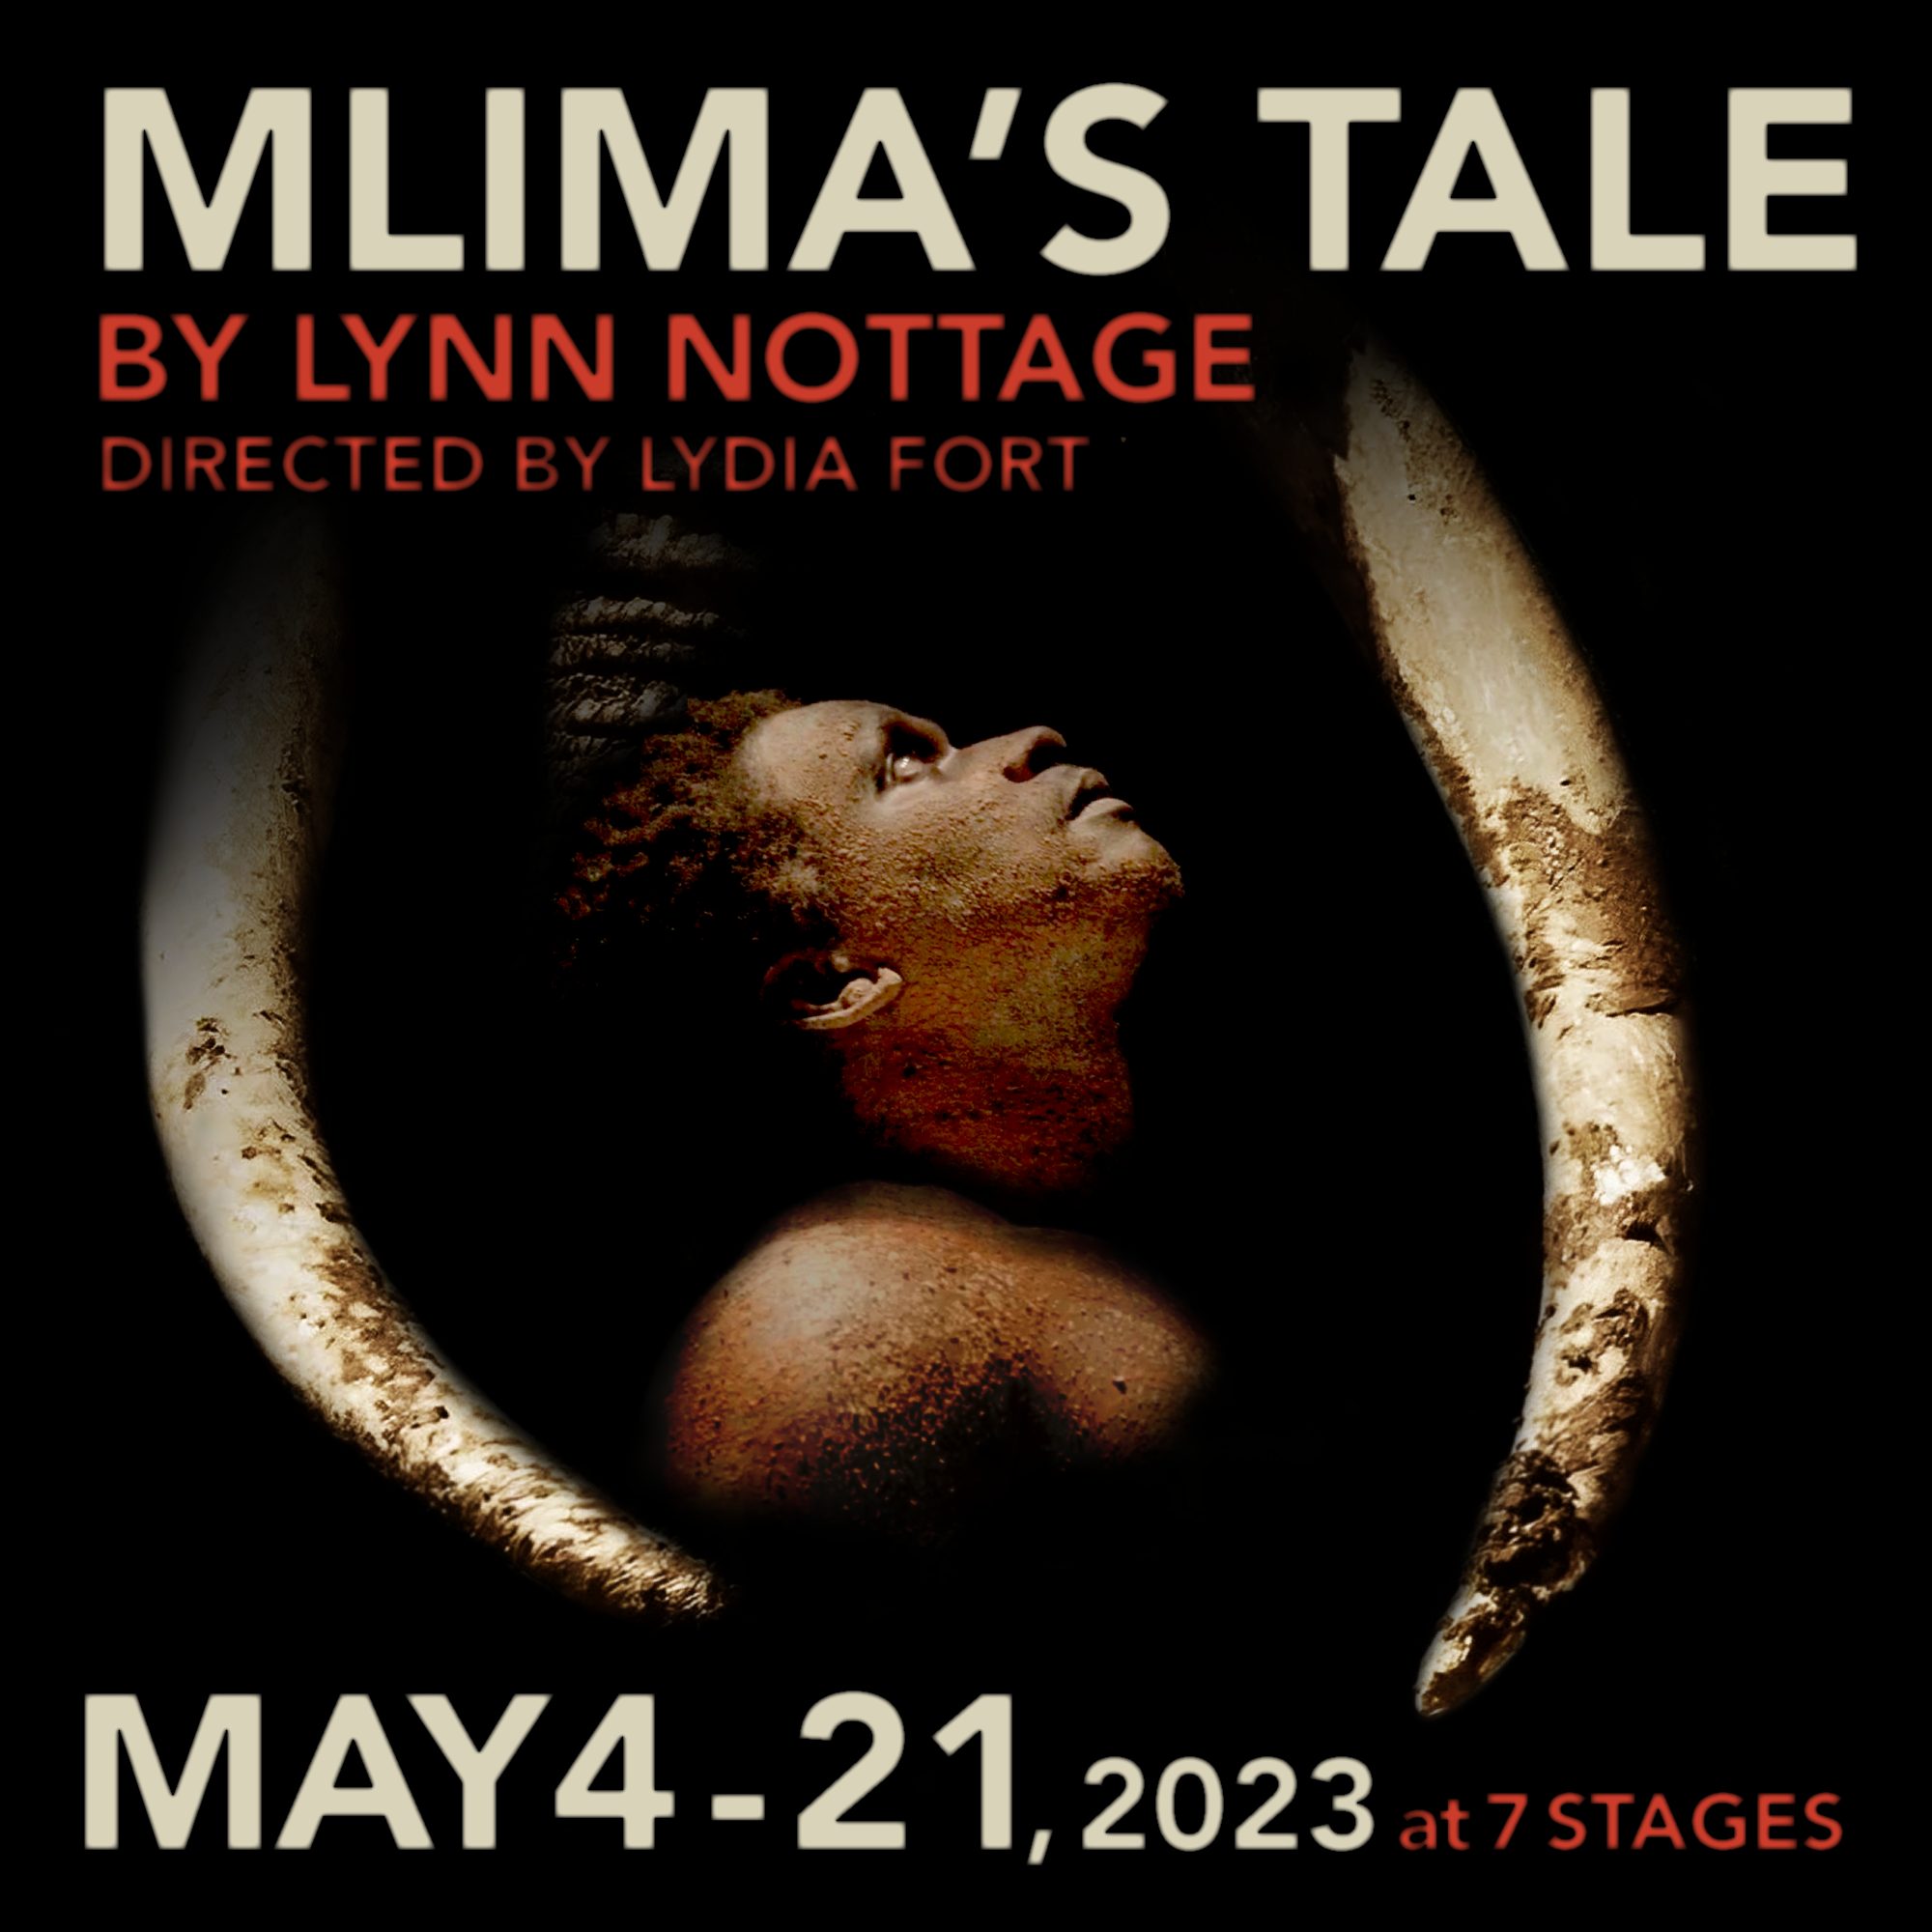 Mlima's Tale by Lynn Nottage. Directed by Lydia Fort. May 4-21, 2023 at 7 Stages.